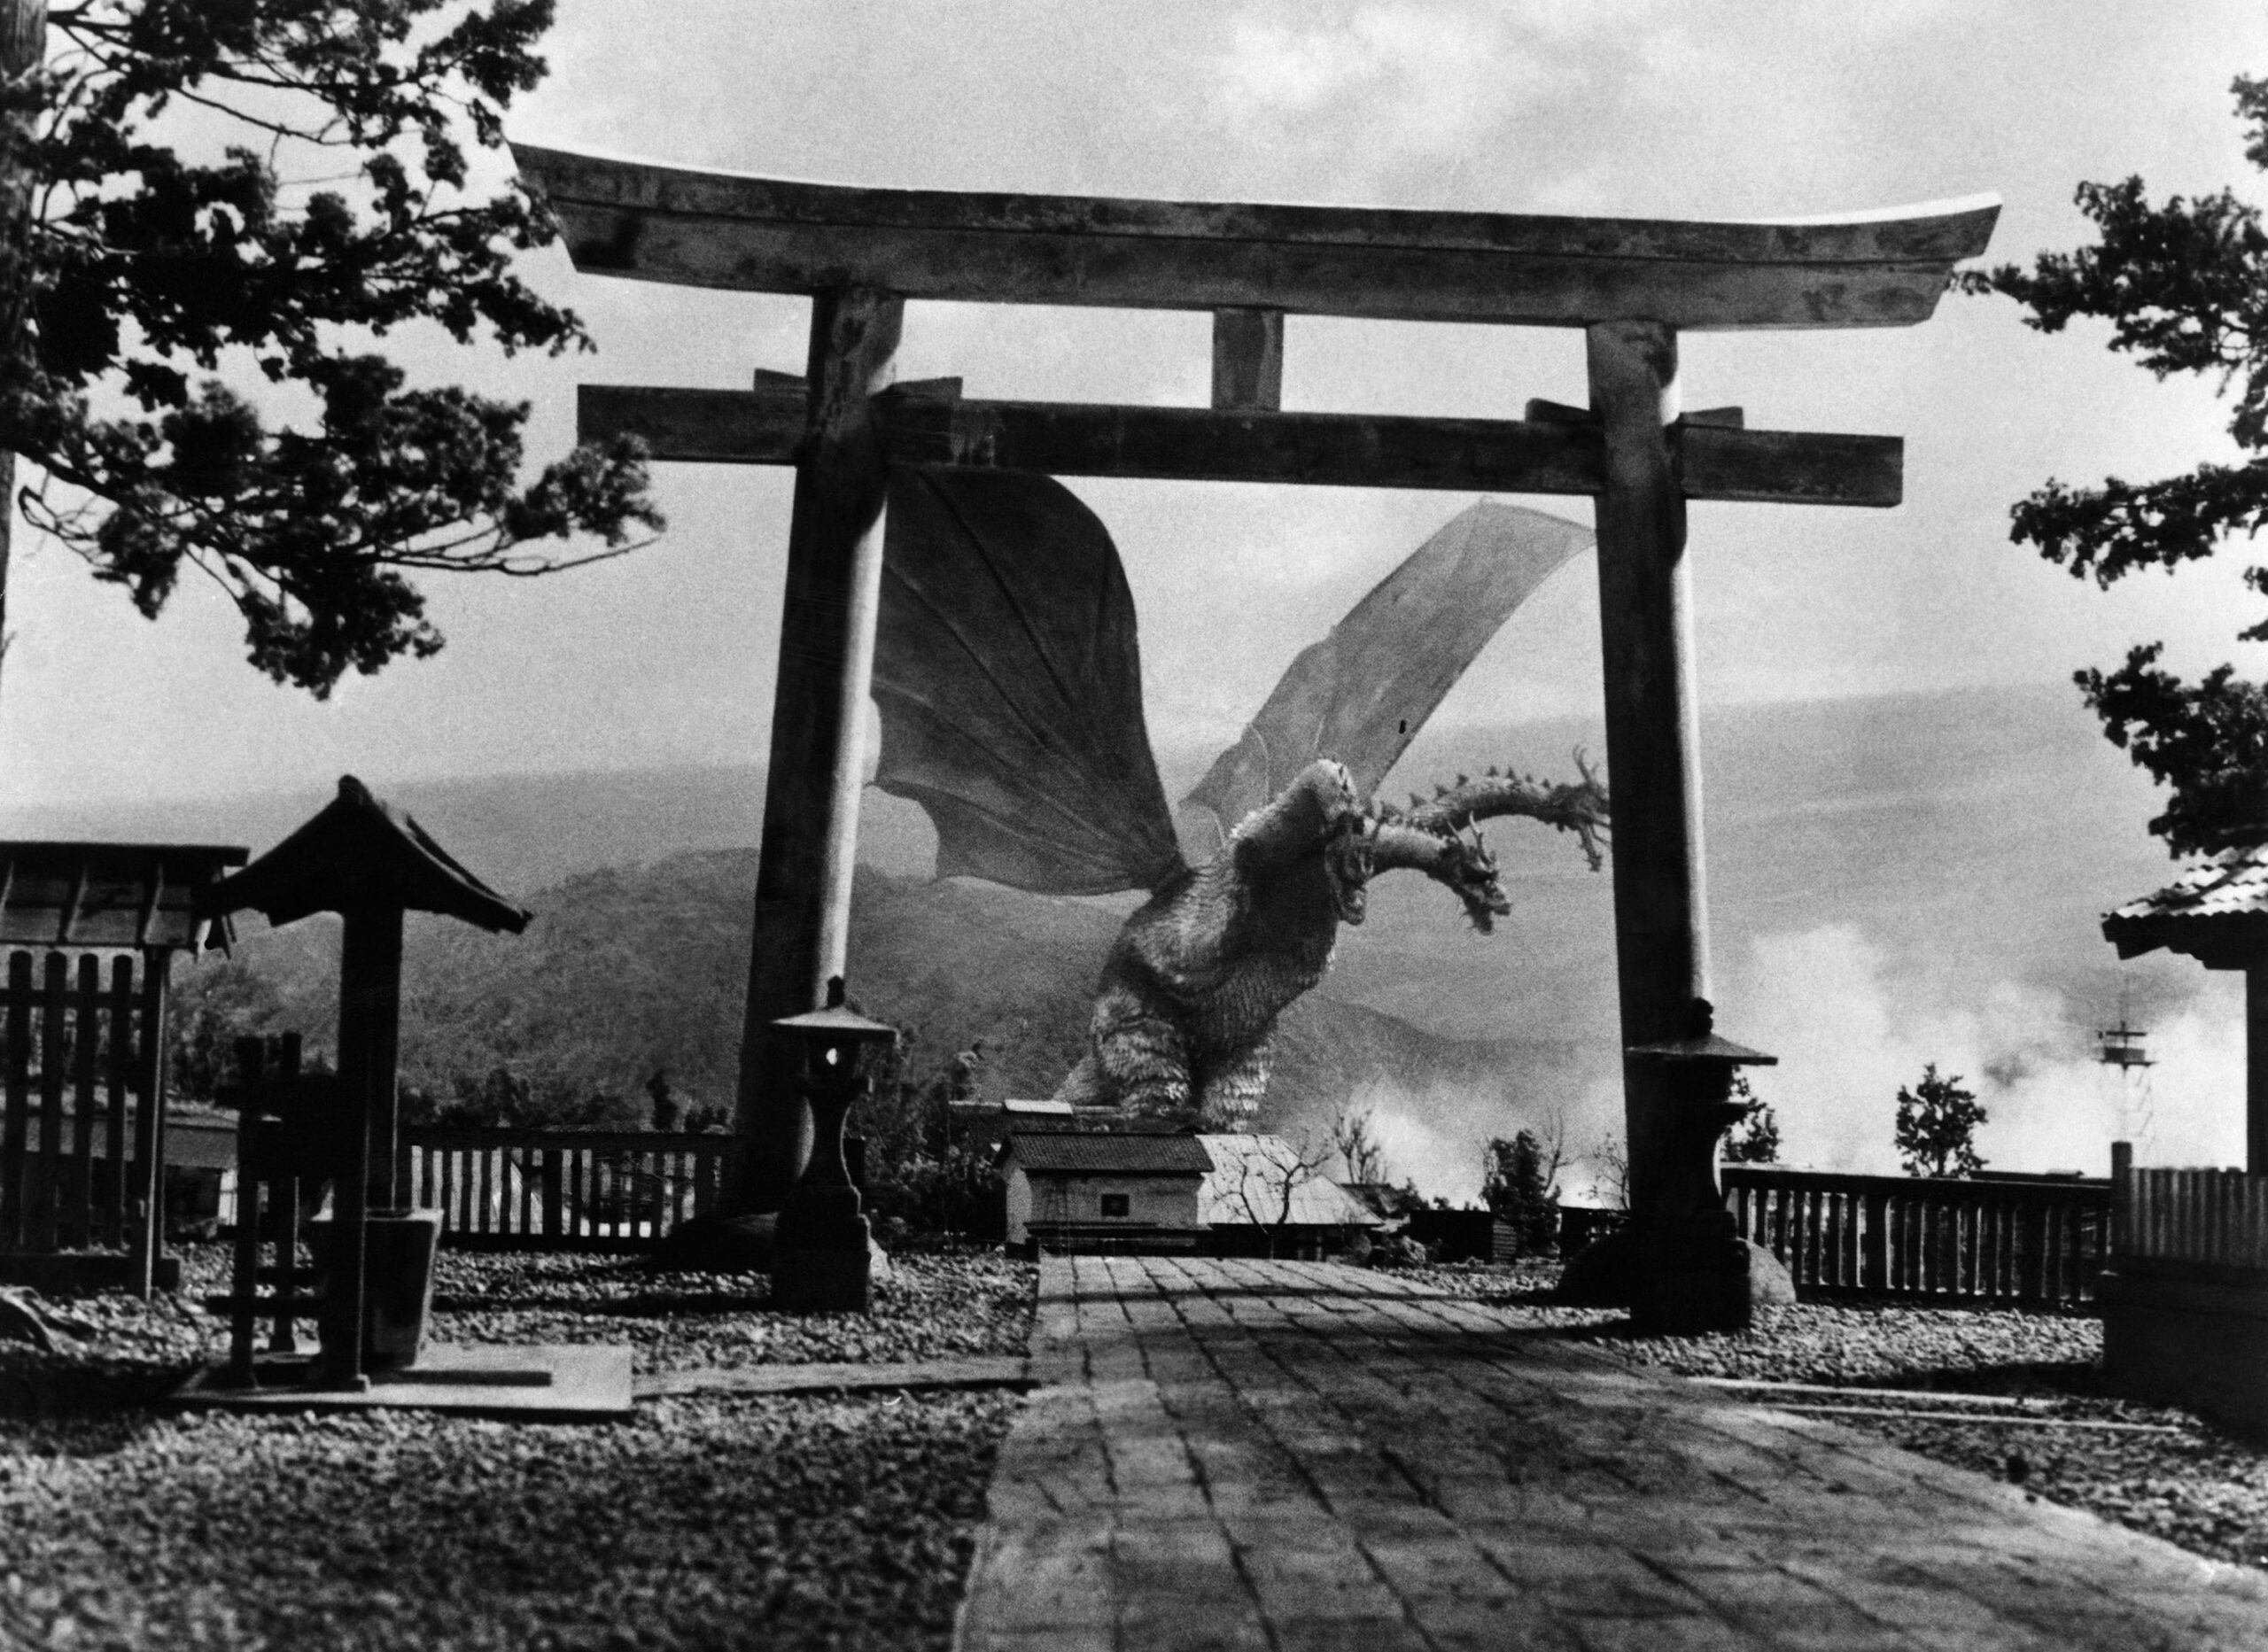 black and white photo from the 1964 Toho movie "Ghidorah the Three-Headed Monster." It depicts the titular kaiju, a large, dragon-like creature with three snake-like heads and large wings, about to attack a Japanese village.